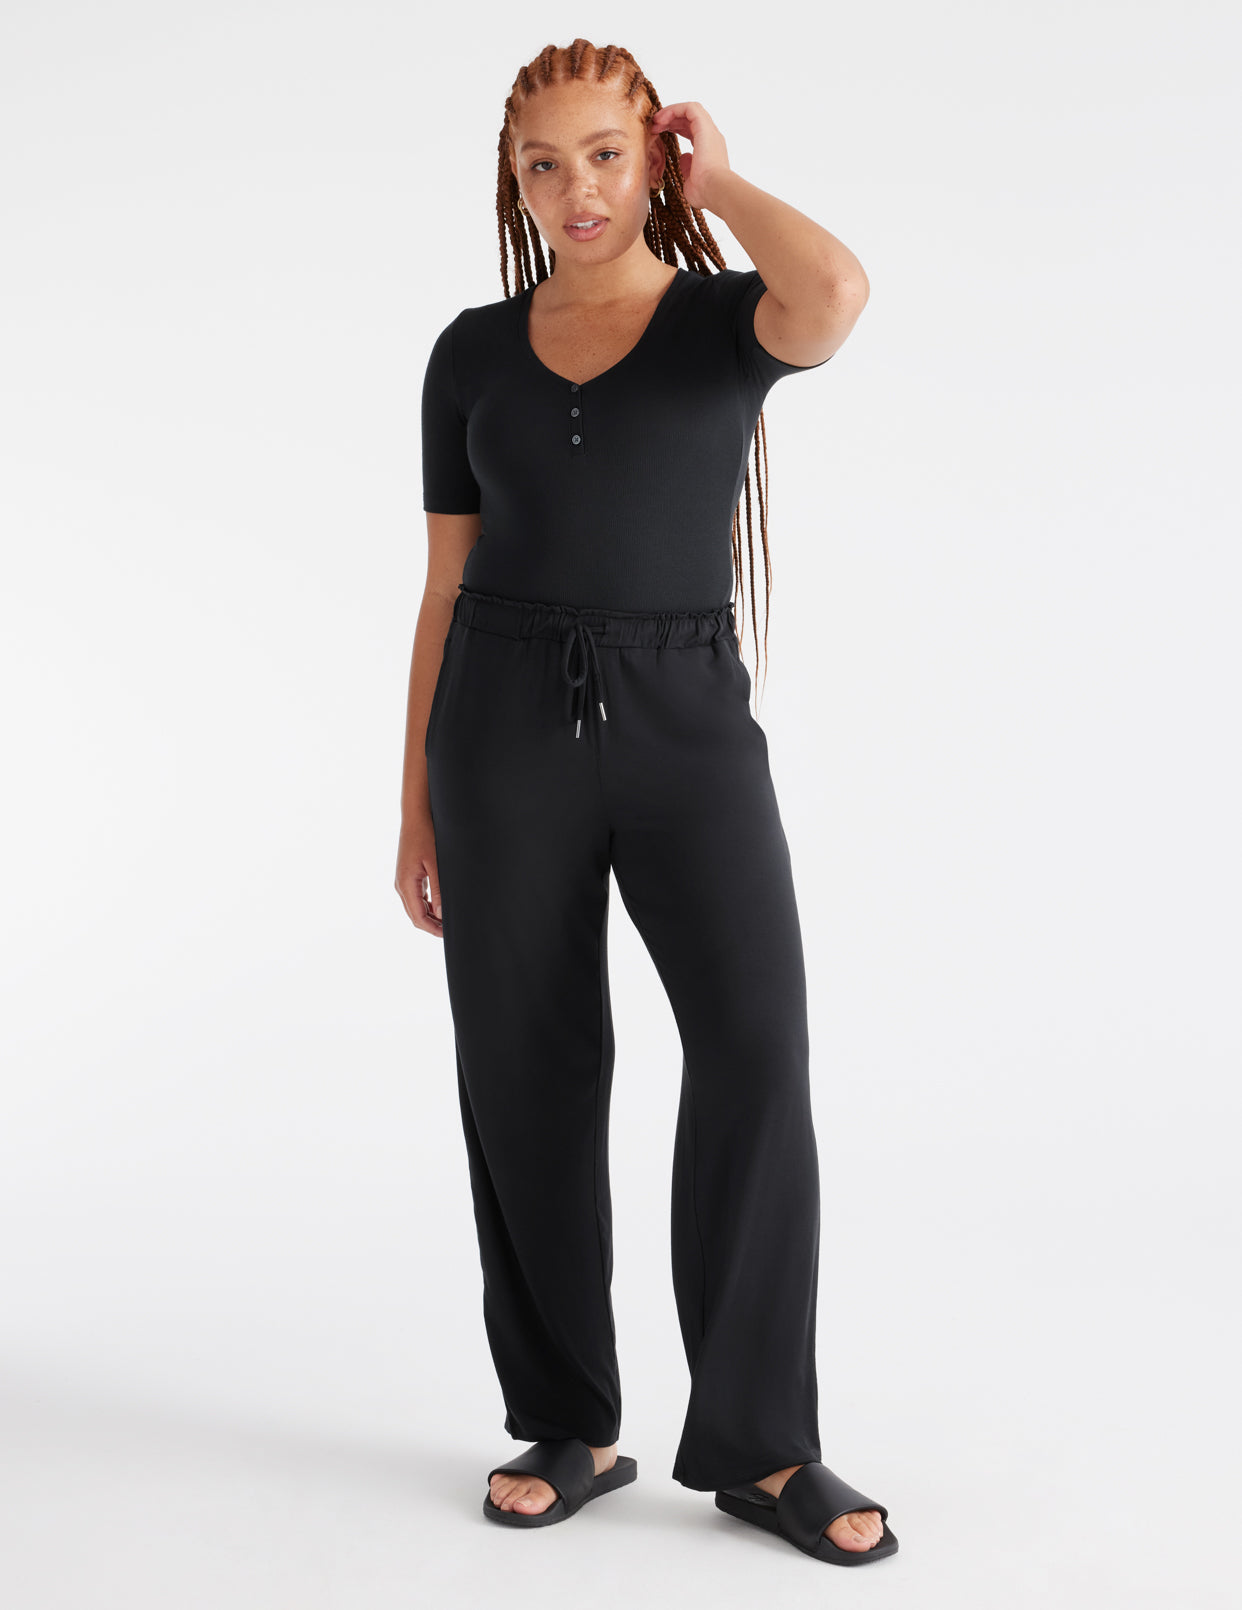 Knix Is Having an Epic Warehouse Sale up to 50 Percent Off - PureWow